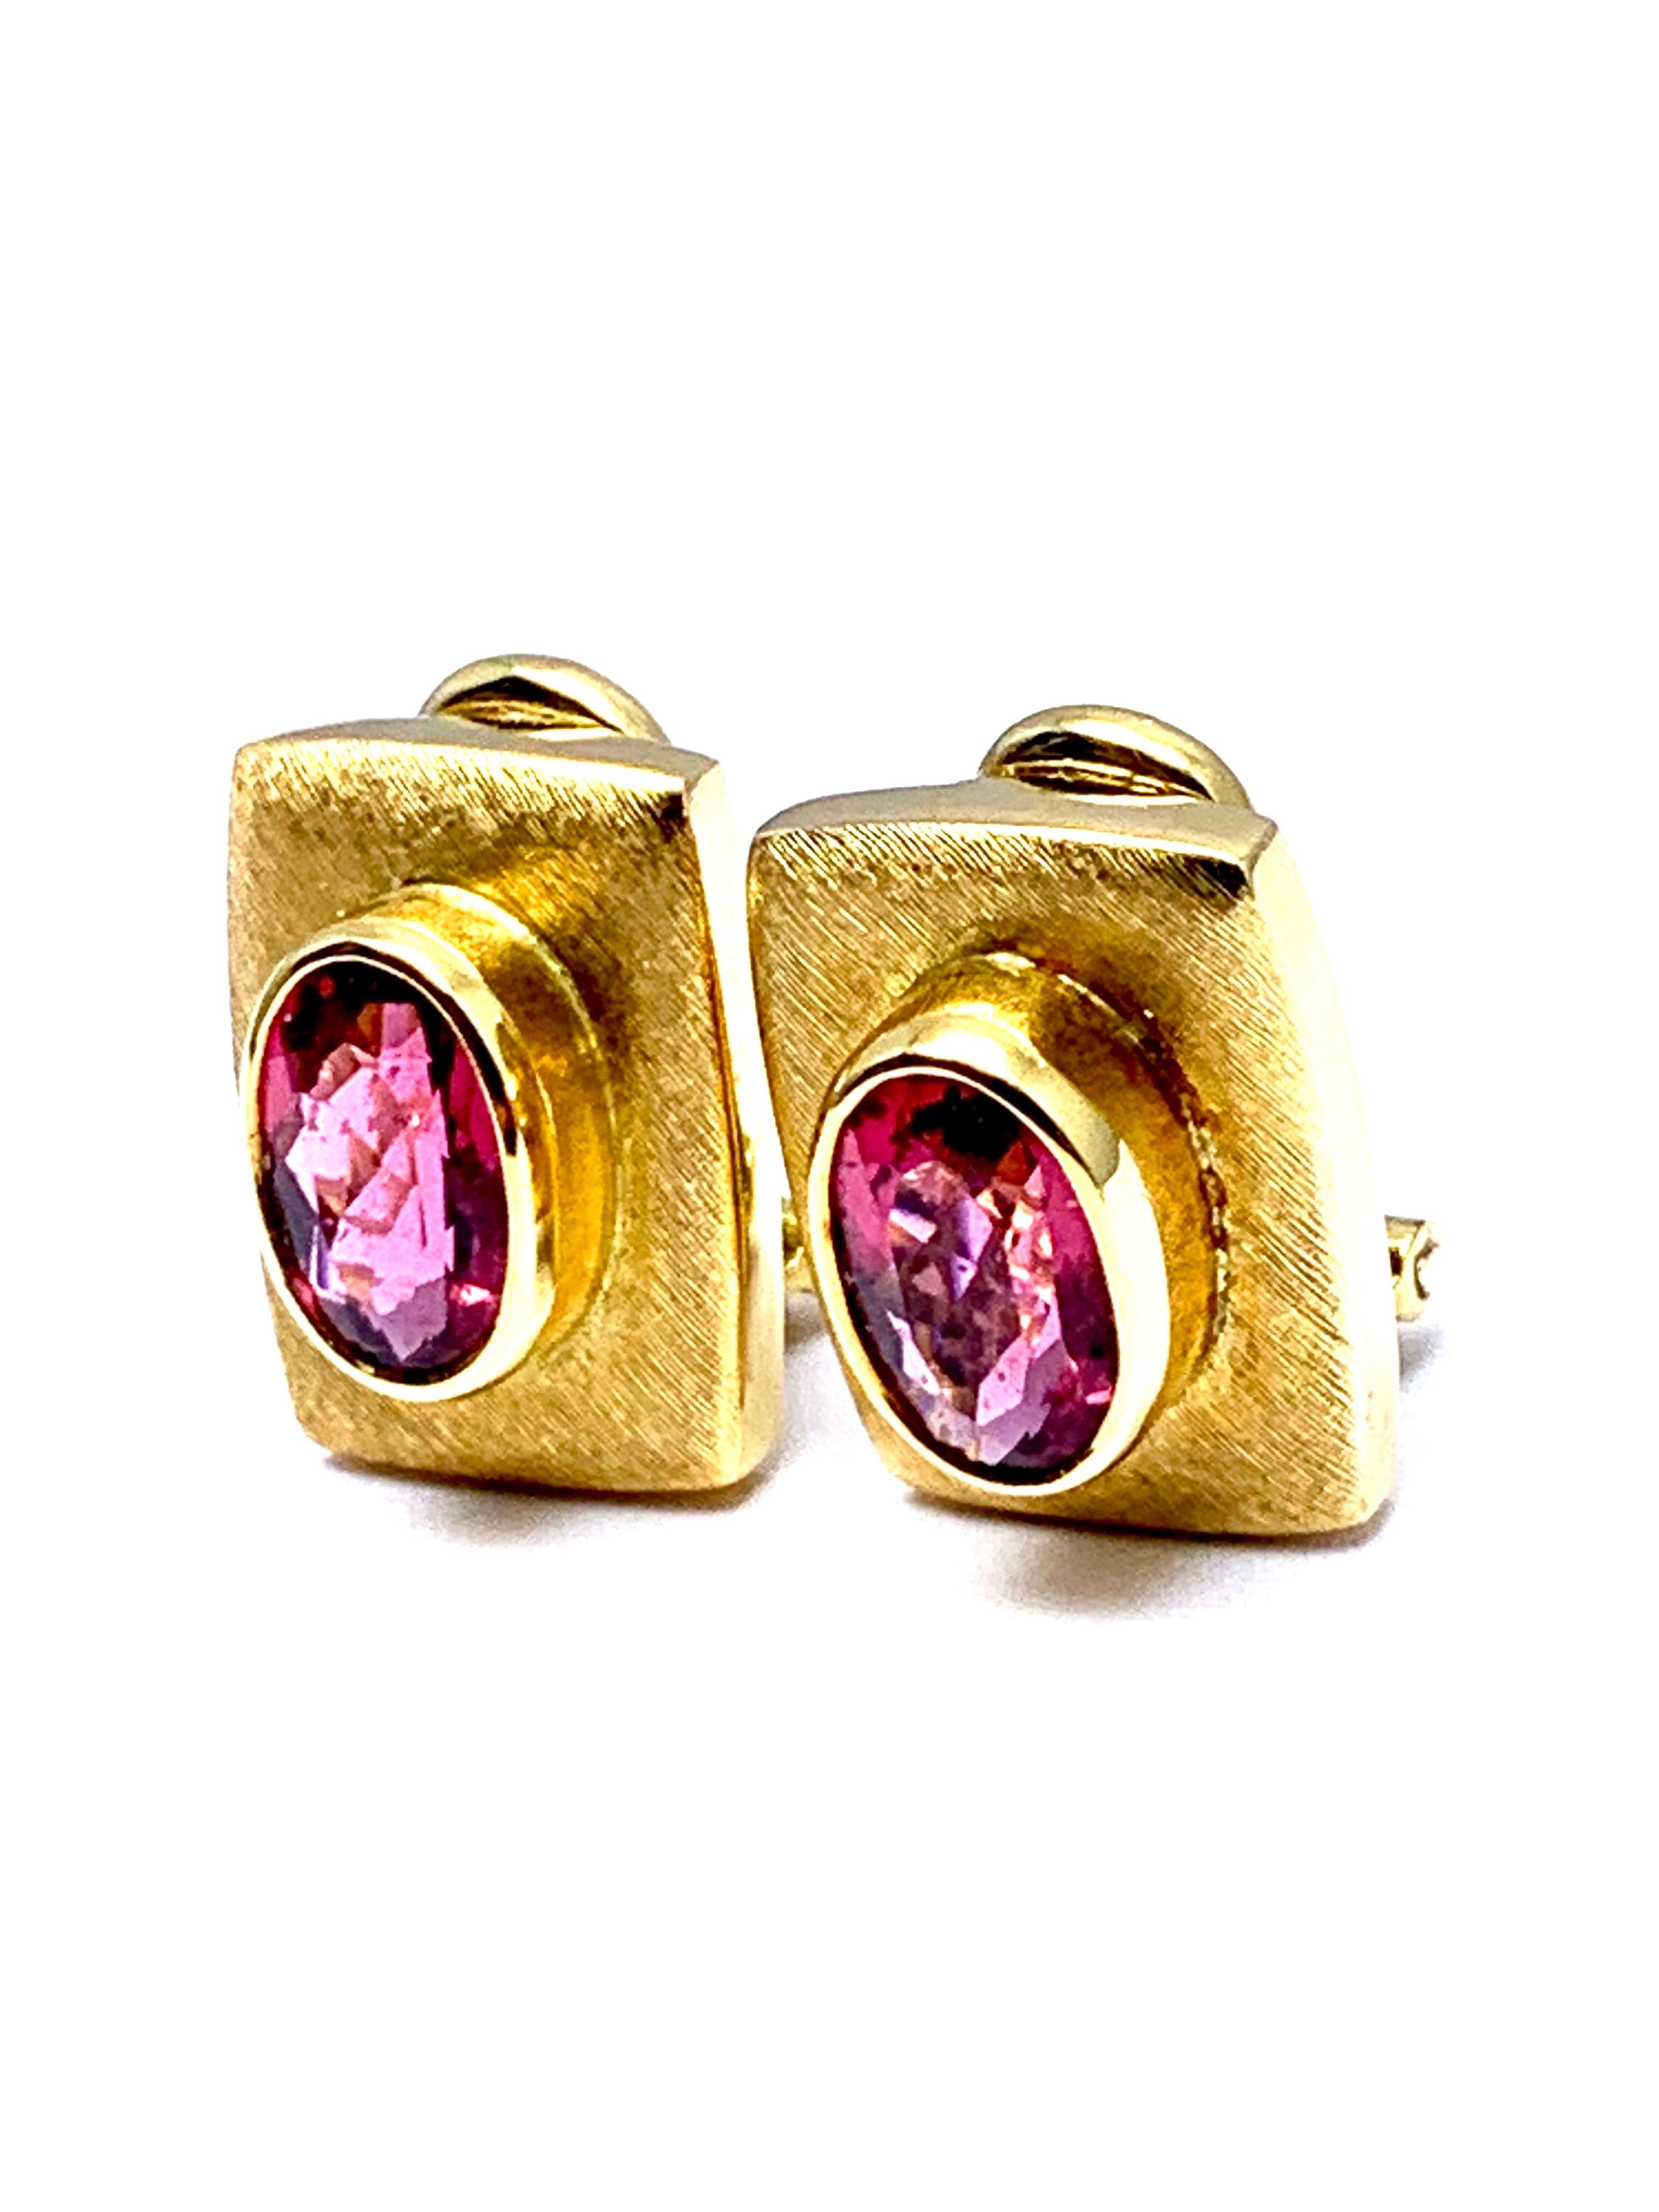 A beautiful Pink Tourmaline earrings designed by Burle Marx. The 3.89 carat faceted oval Pink Tourmaline displays a light pink hue, bezel set in an 18 karat yellow gold abstarct design earrings. The backs of the earrings are signed 